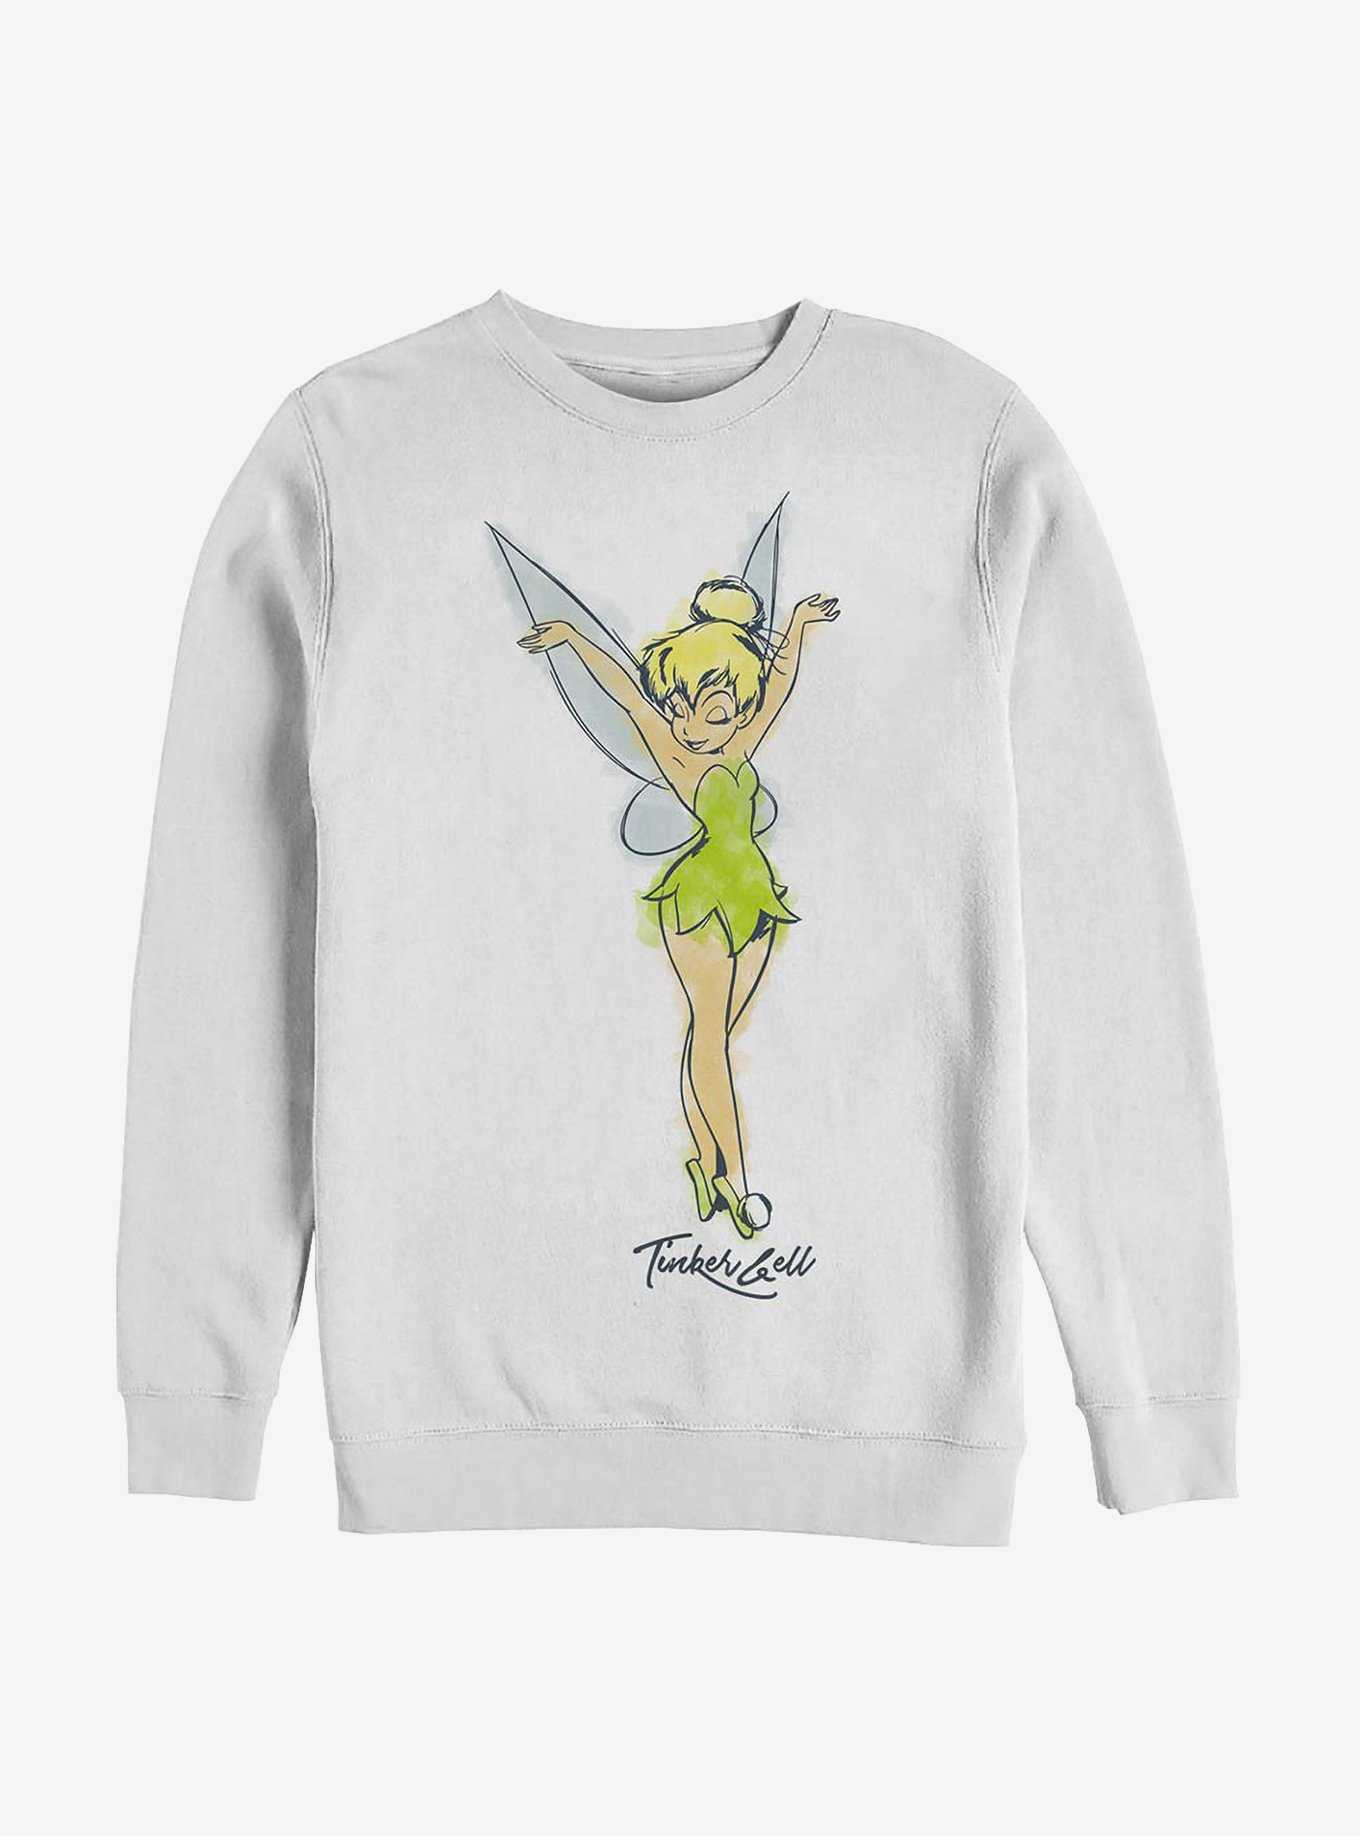 OFFICIAL Peter Pan Merchandise, Shirts & More | Hot Topic